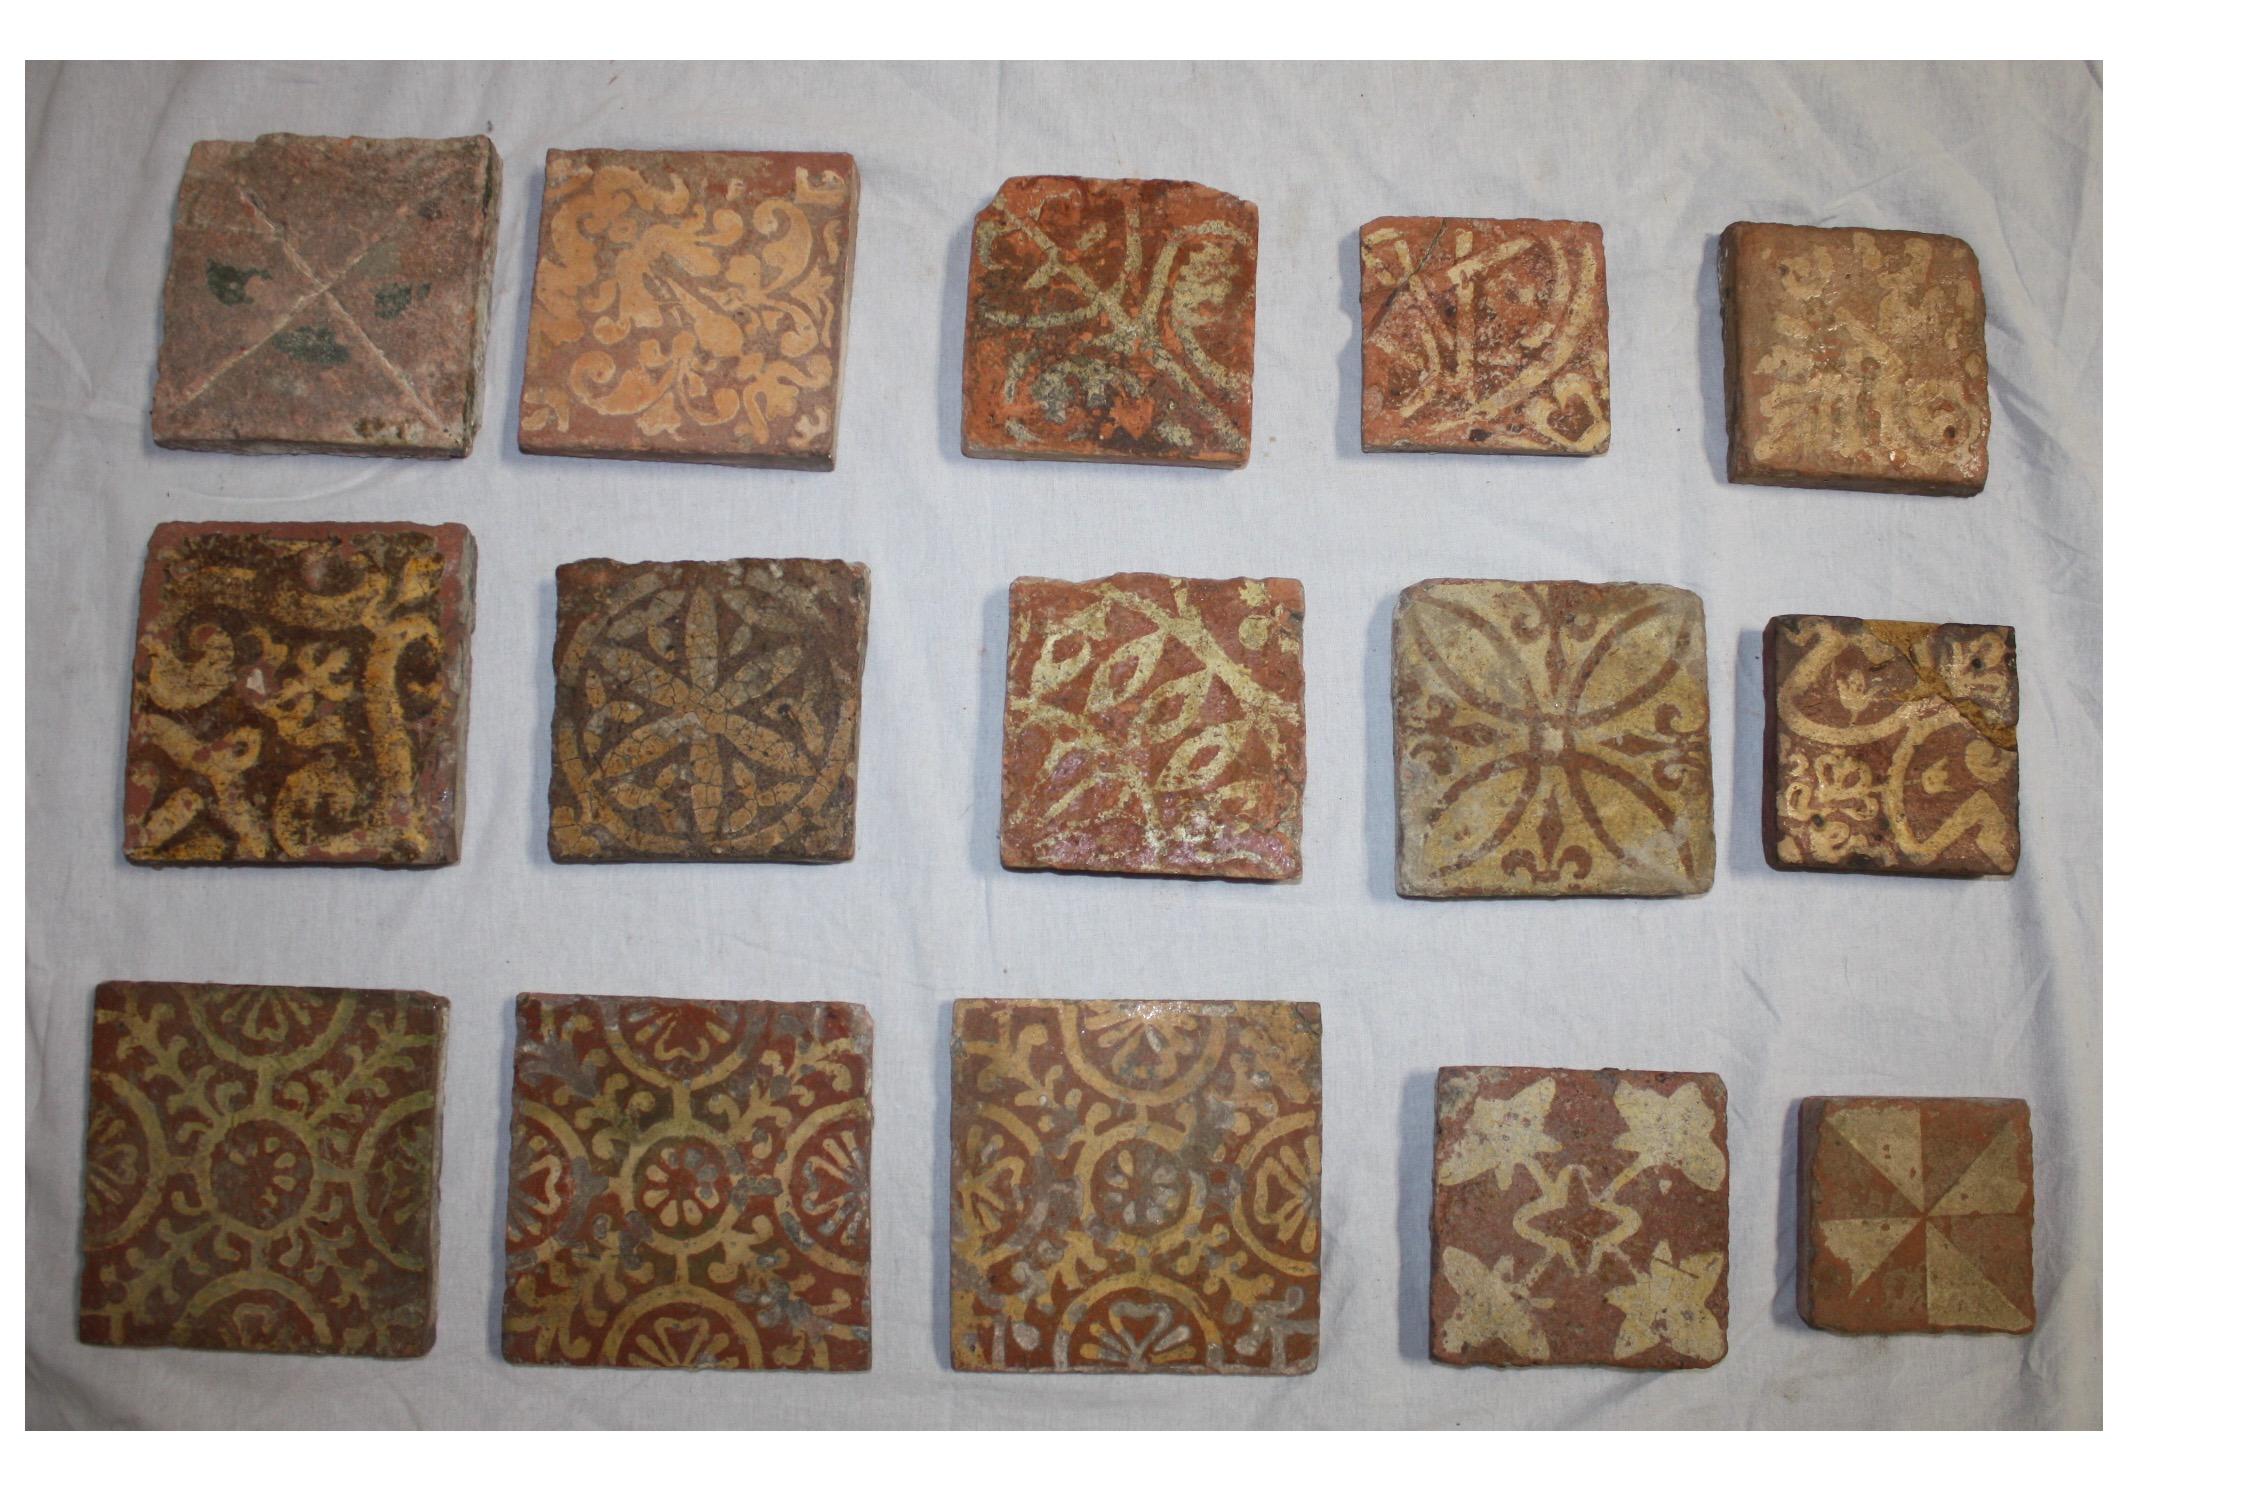 French 16th century tiles
Dimensions from the left top to the right of each tile.
a) 5.25